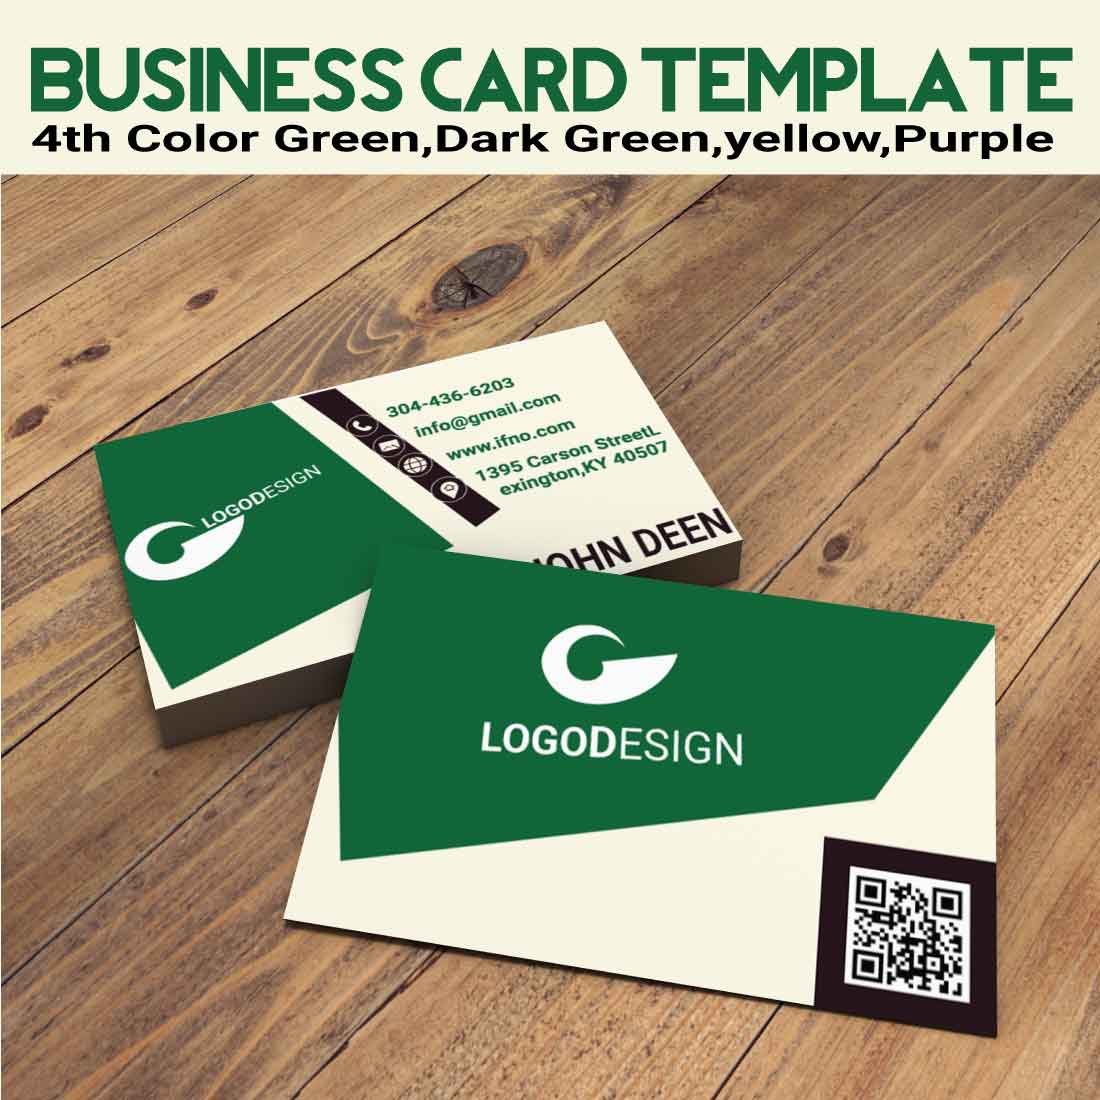 BUSINESS CARDS TEMPLATE cover image.